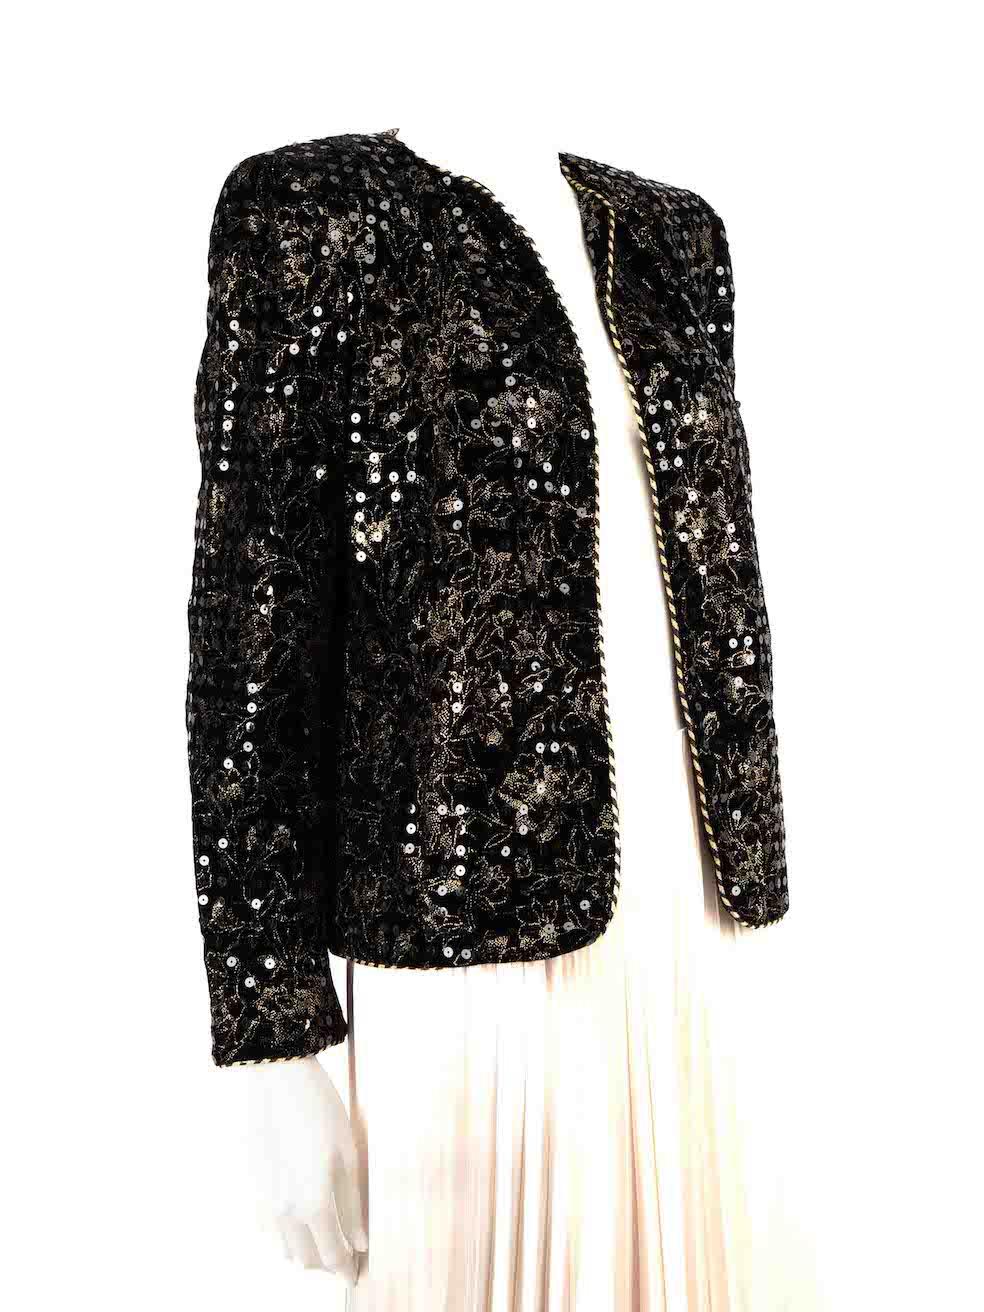 CONDITION is Very good. Hardly any visible wear to jacket is evident beyond a couple of stray embroidery threads on this used Céline designer resale item.
 
 
 
 Details
 
 
 Vintage
 
 Black
 
 Velvet
 
 Jacket
 
 Sequin embellished
 
 Metallic